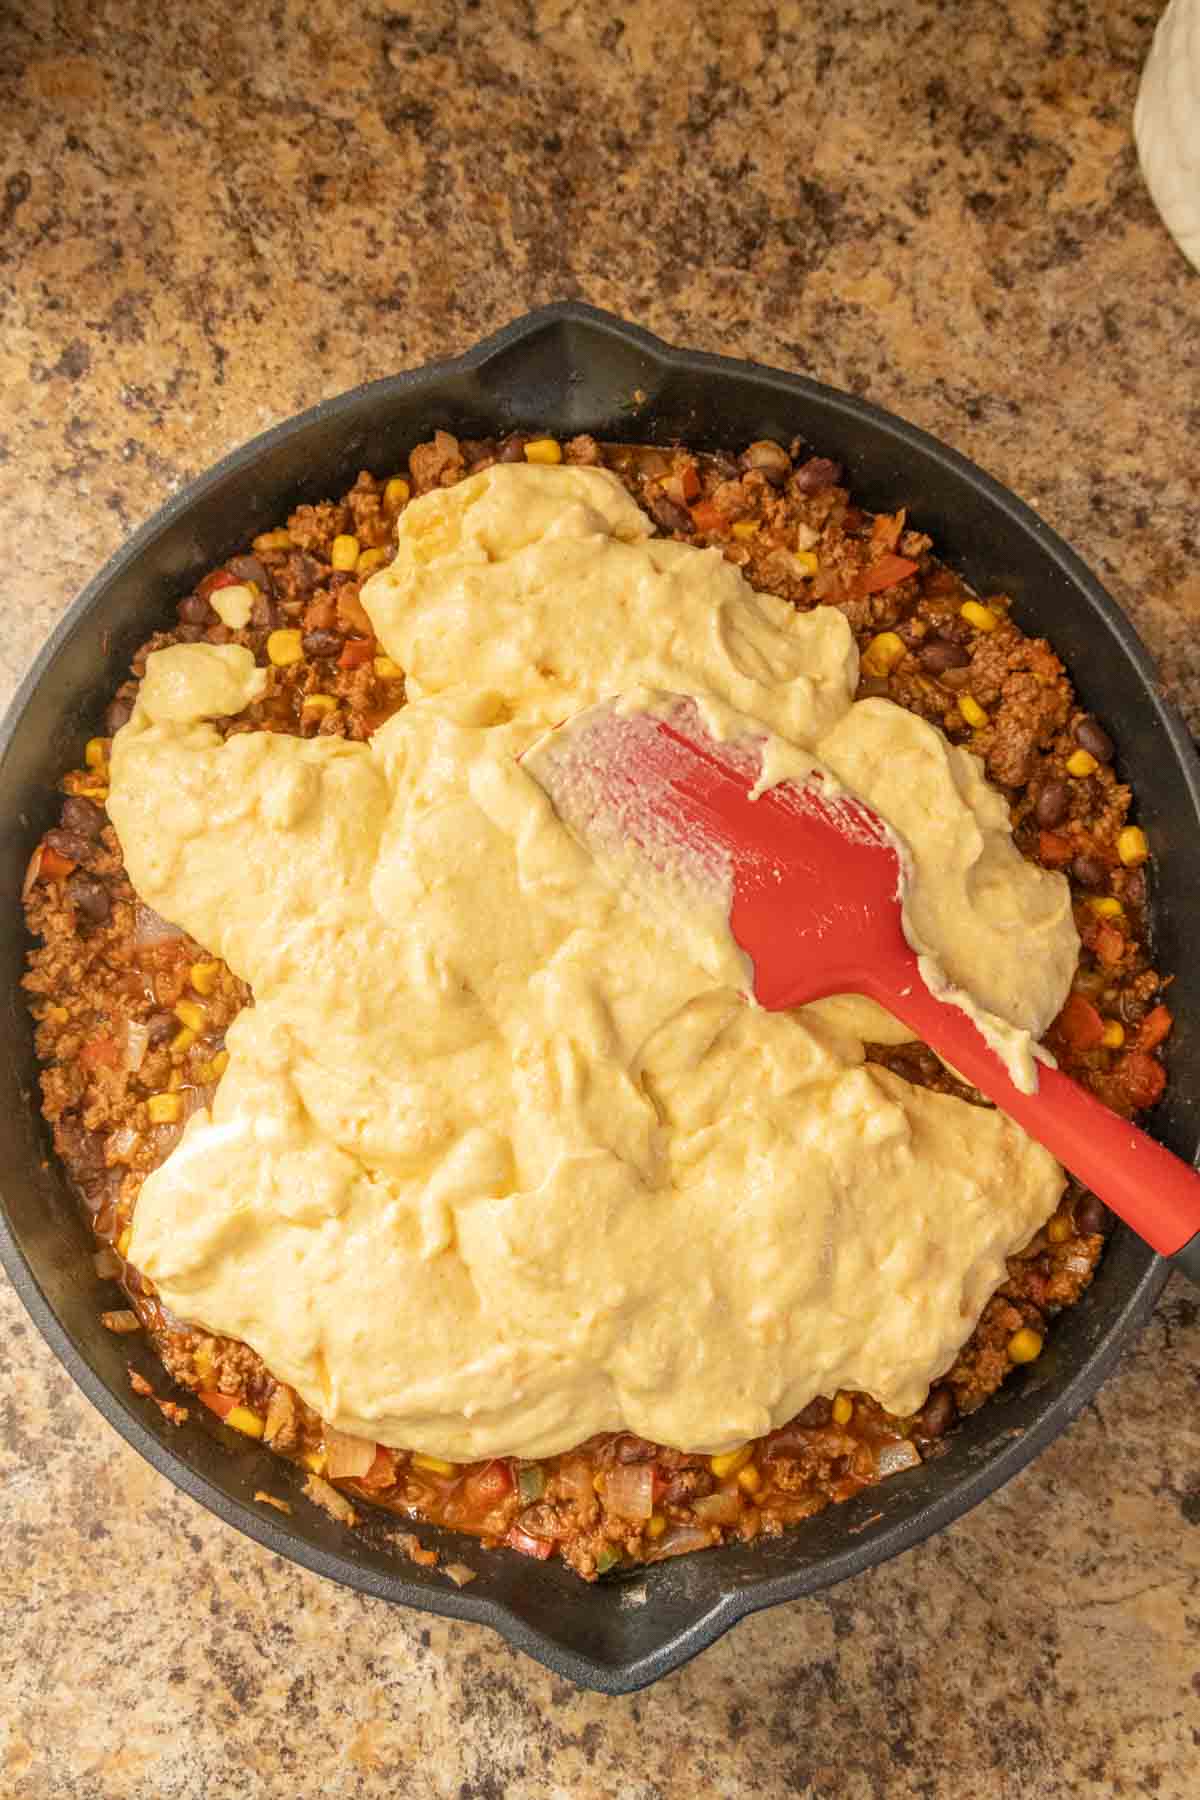 Spreading cornbread batter over a meat and vegetable mixture in a cast-iron skillet.